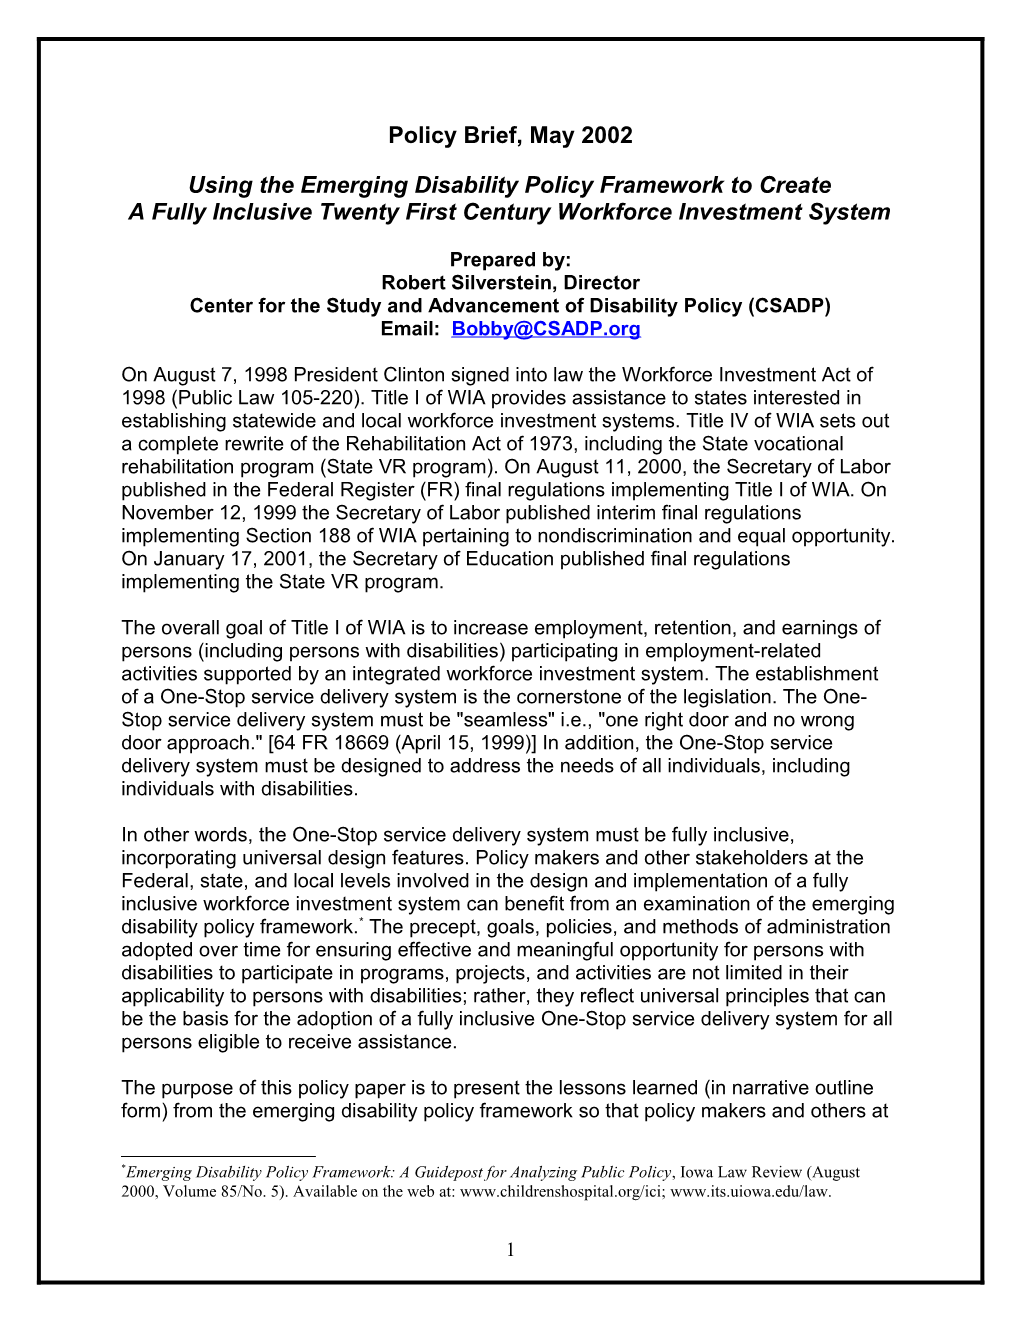 Using the Emerging Disability Policy Framework to Create